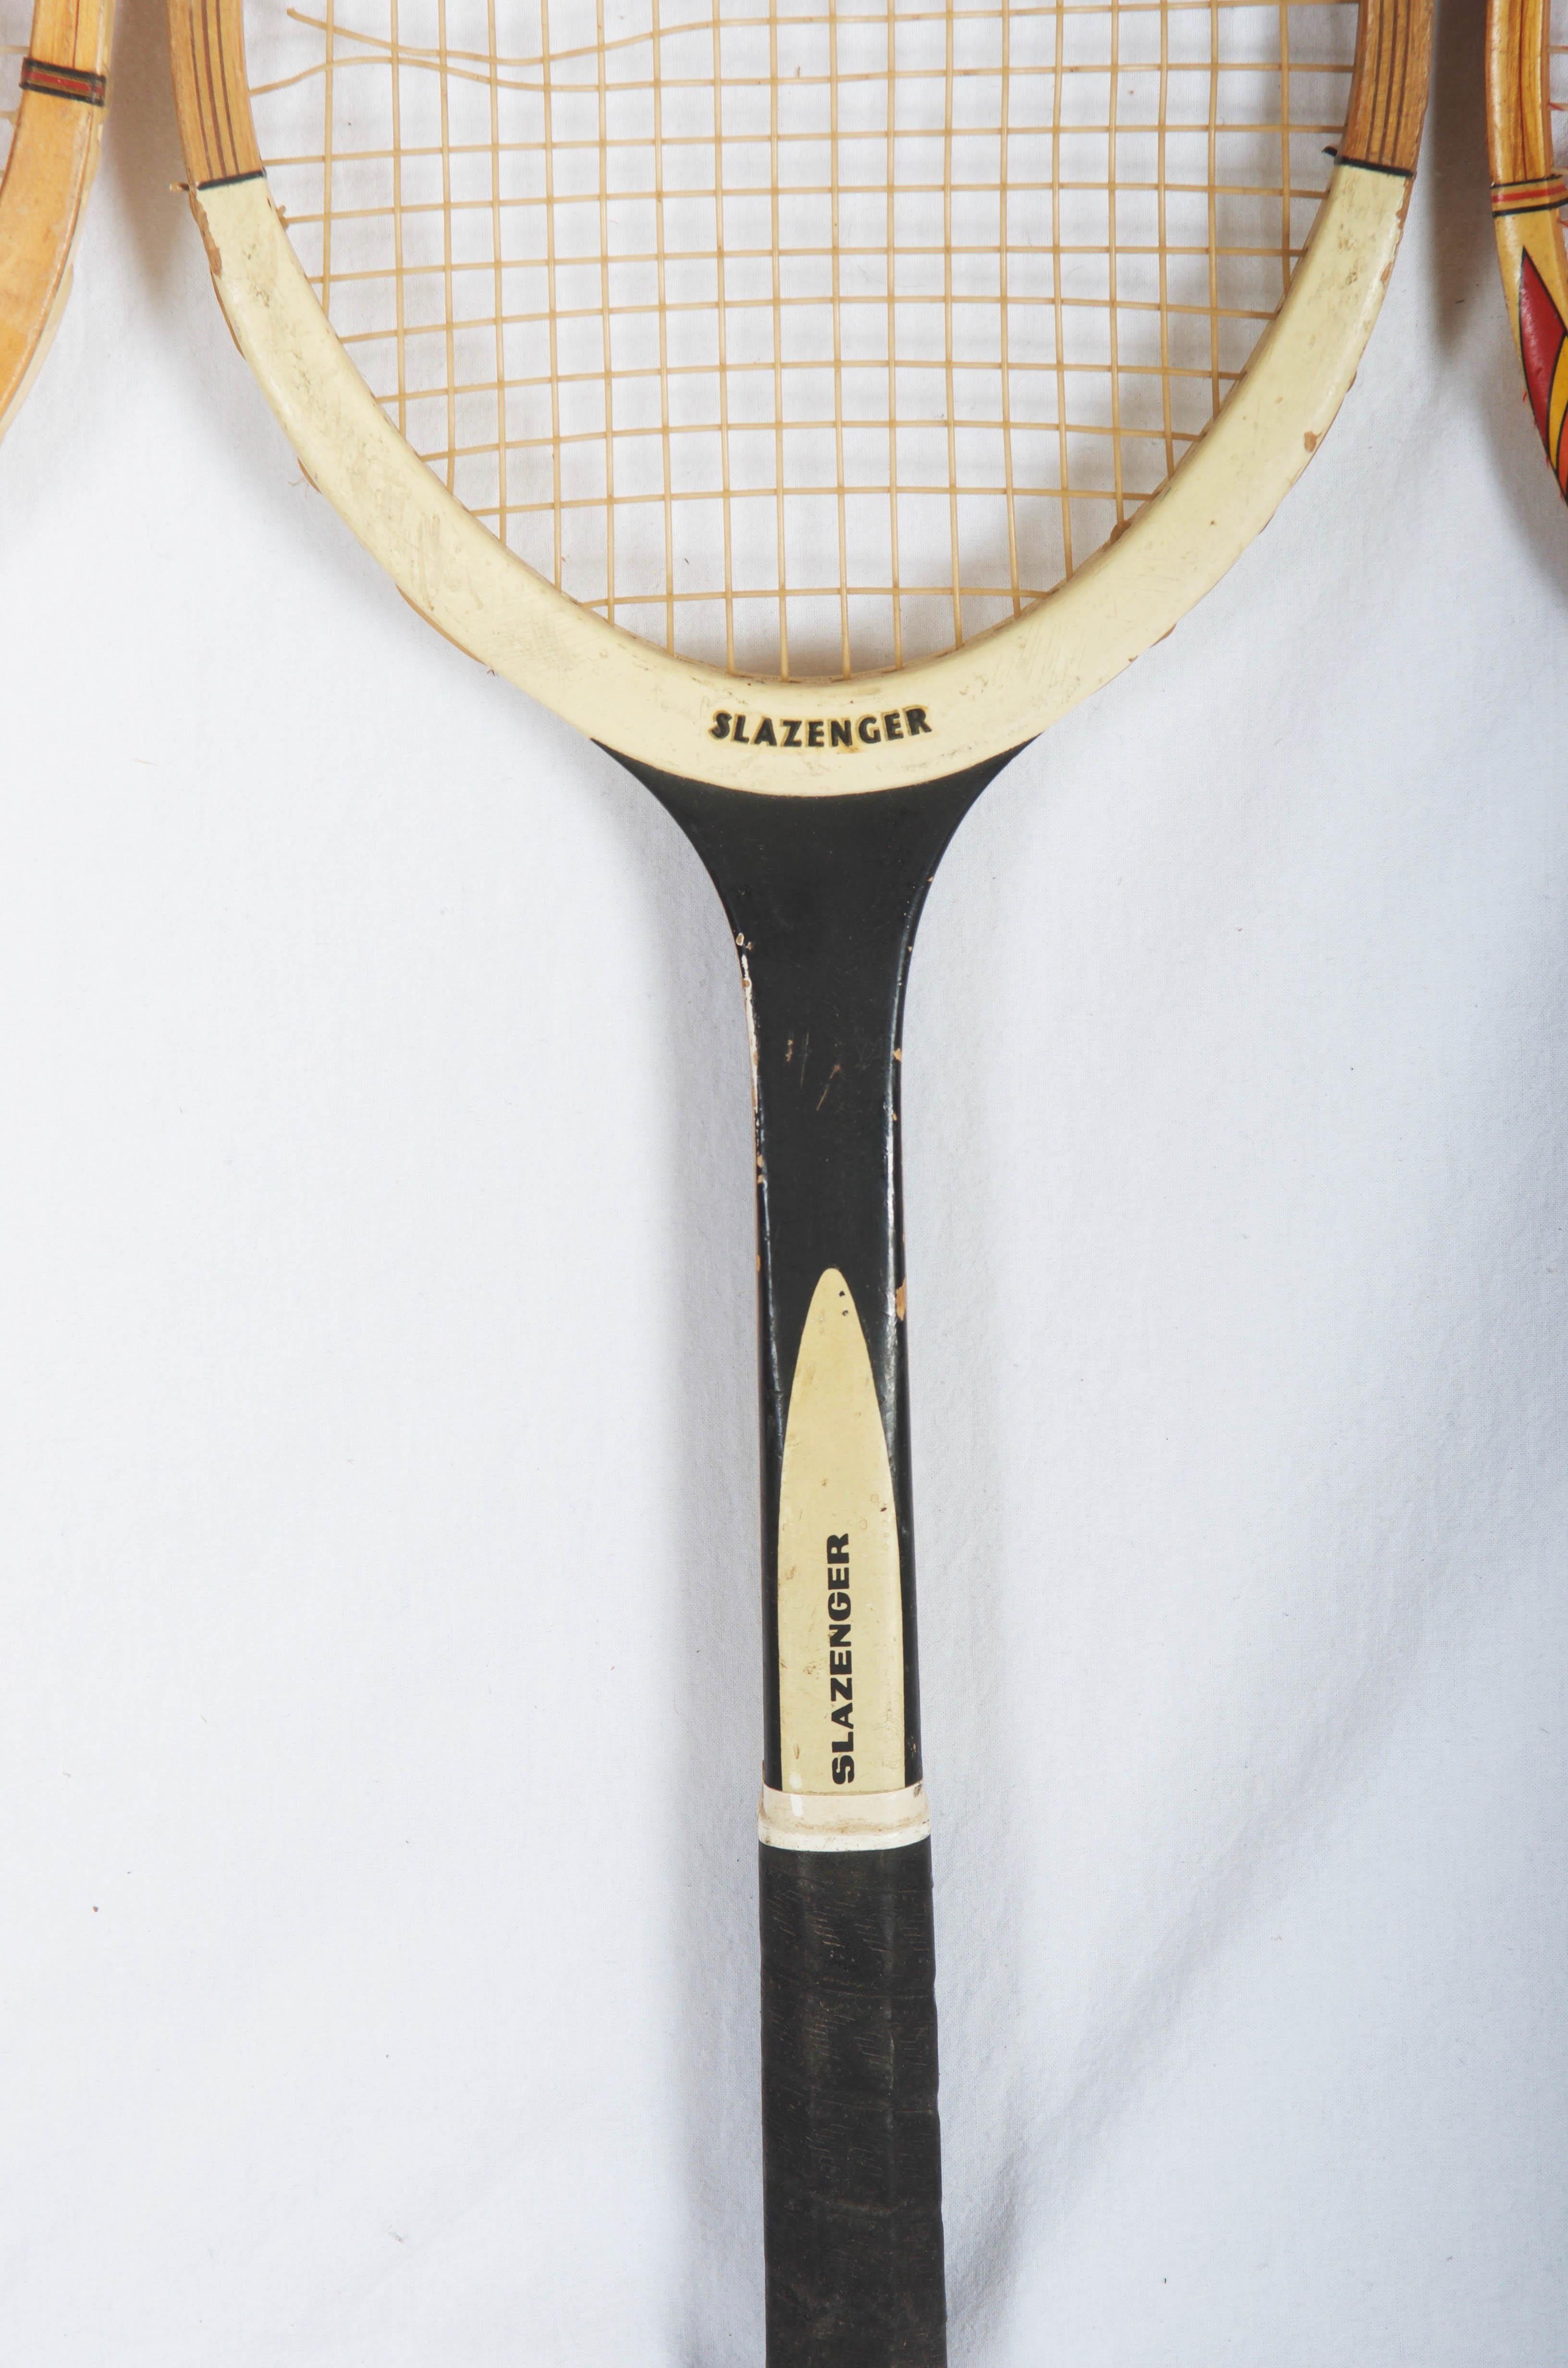 tennis racket for sale